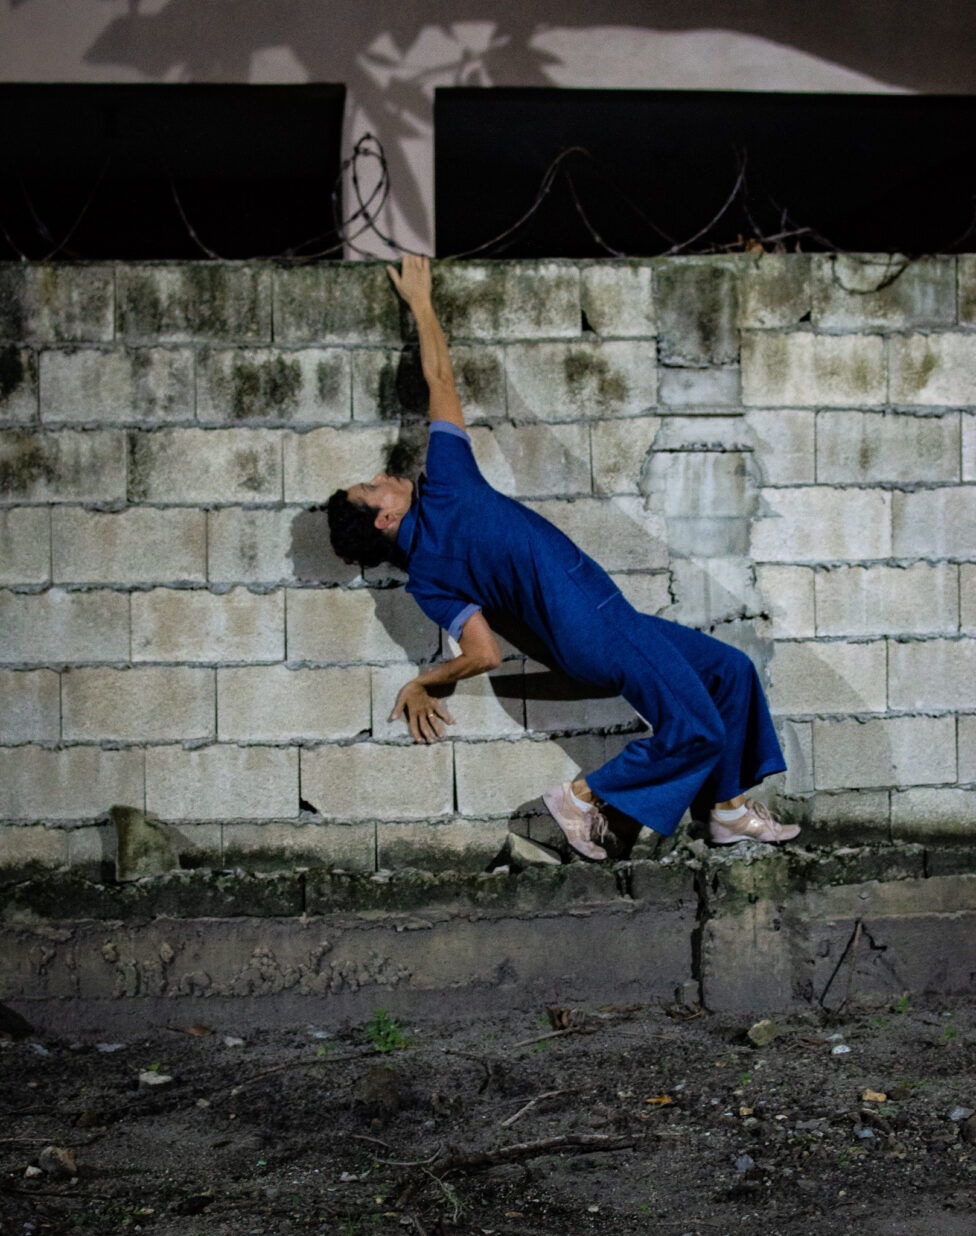 [Karen Langevin wearing a blue jumpsuit and pink sneakers hoisting diagonally against a concrete brick wall]. Photo by Mariana Belaval 